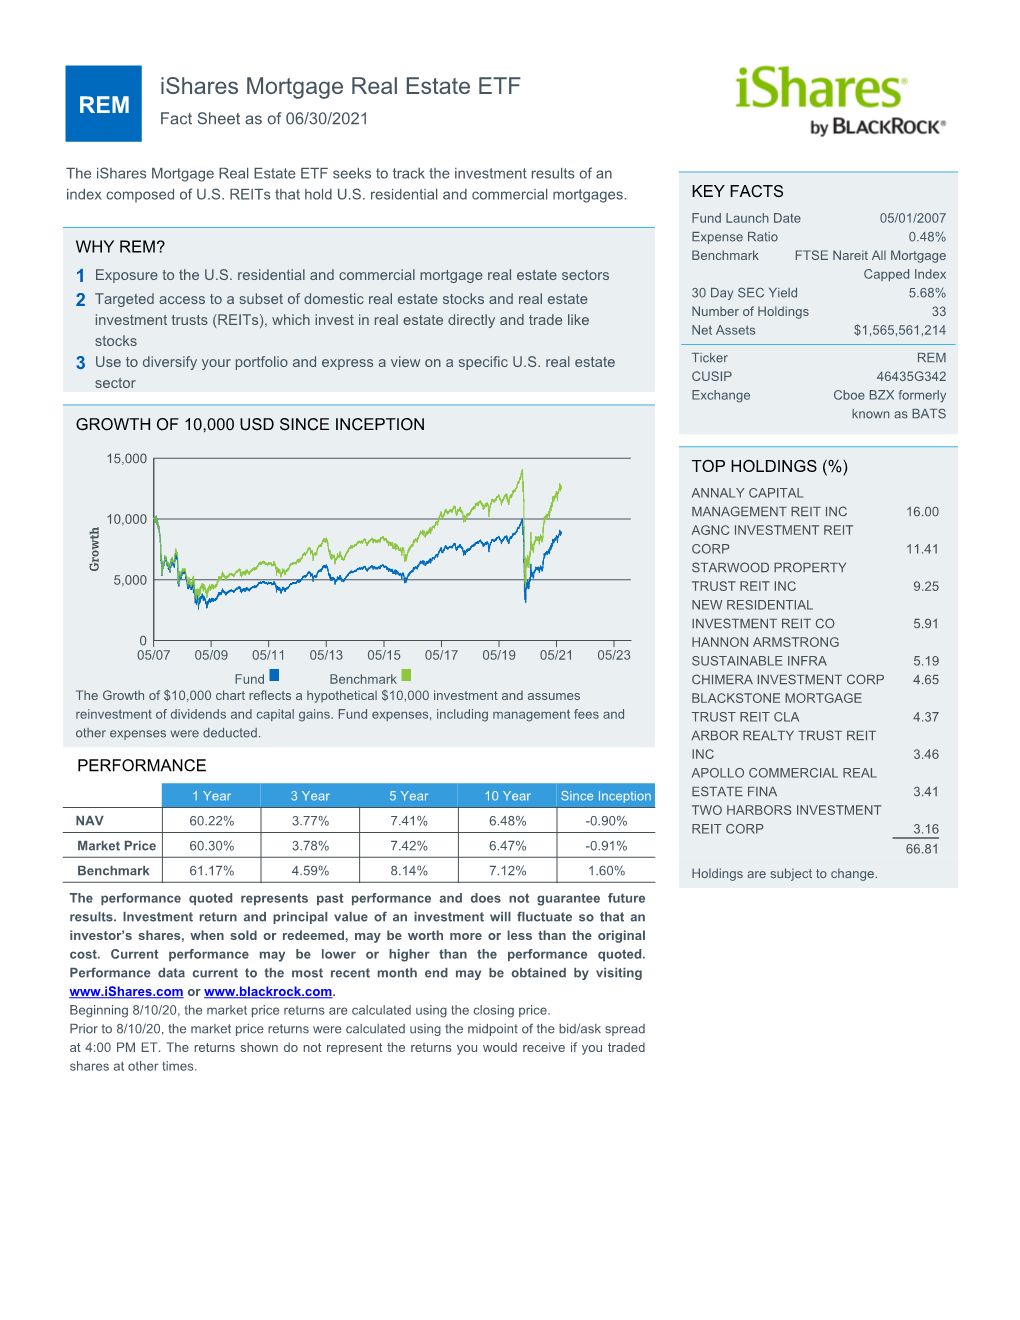 Ishares Mortgage Real Estate ETF REM Fact Sheet As of 06/30/2021